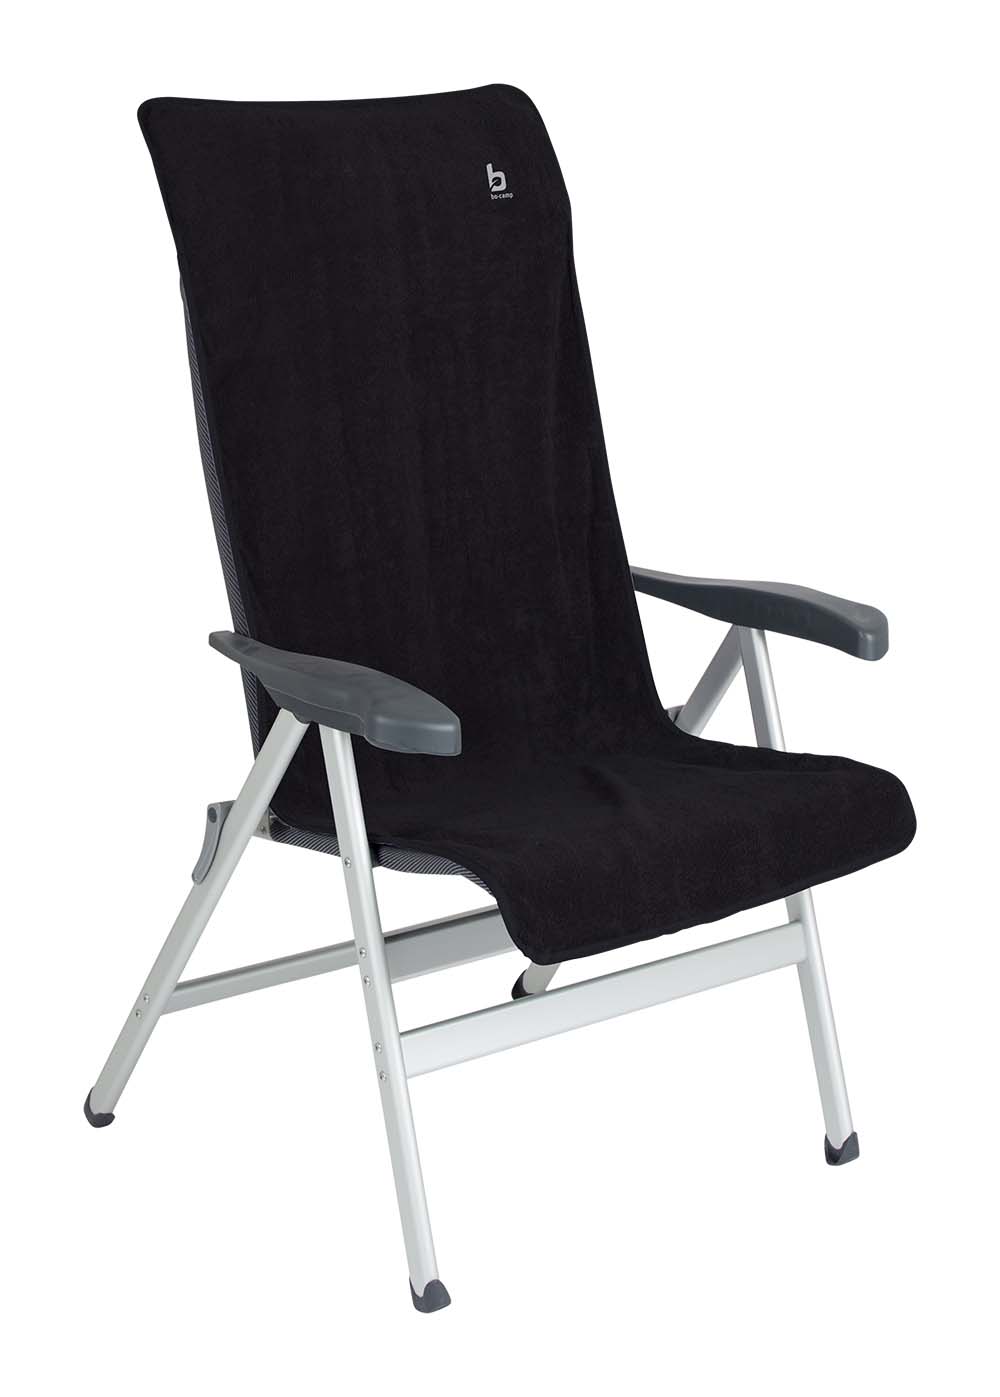 1849285 Bo-Camp - Chair cover - M - Universal - Terry cloth - Cotton - Anthracite